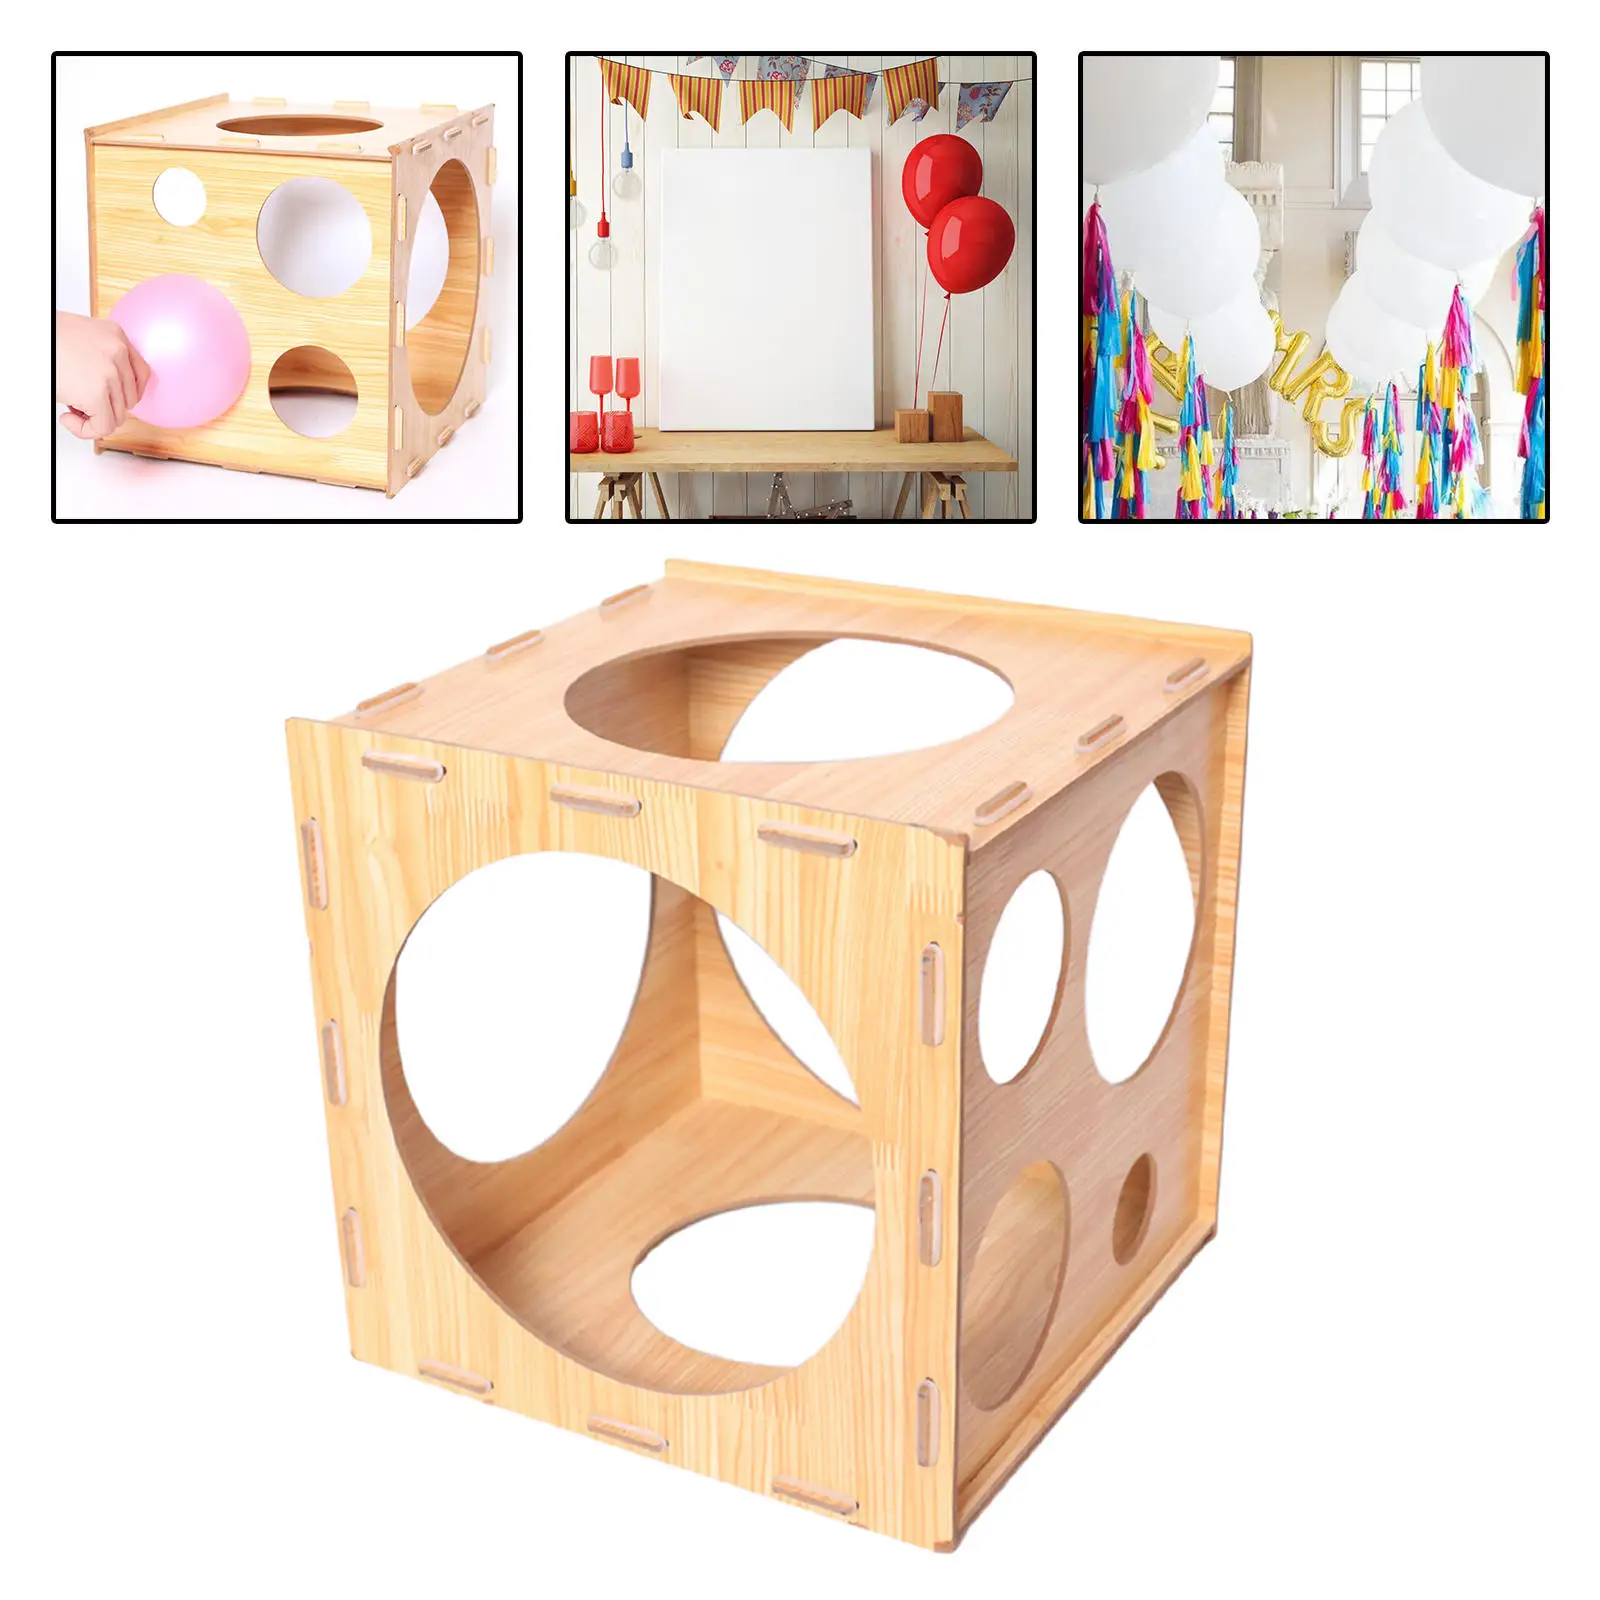 2-10 inch Balloon Sizer Box Wooden Collapsible 9 Holes Balloon Size Measurement Box for Birthday Balloon Arches Wedding Party